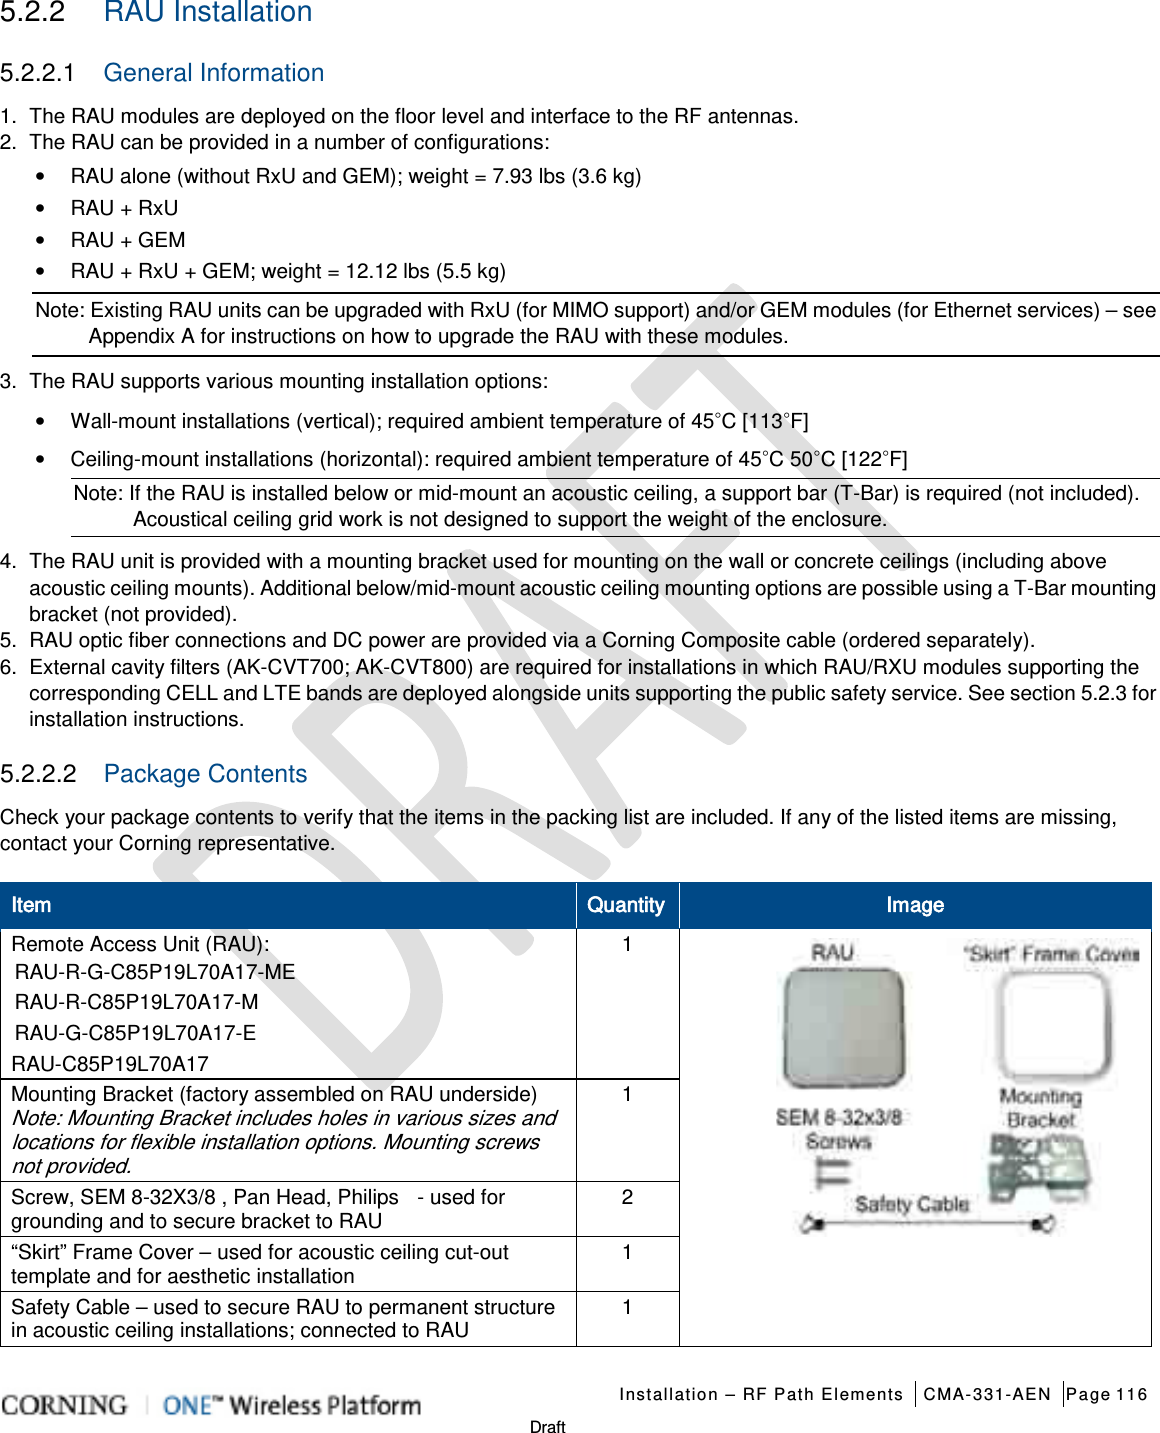   Installation – RF Path Elements CMA-331-AEN Page 116   Draft 5.2.2  RAU Installation 5.2.2.1  General Information 1.  The RAU modules are deployed on the floor level and interface to the RF antennas. 2.  The RAU can be provided in a number of configurations: • RAU alone (without RxU and GEM); weight = 7.93 lbs (3.6 kg)   • RAU + RxU • RAU + GEM • RAU + RxU + GEM; weight = 12.12 lbs (5.5 kg) Note: Existing RAU units can be upgraded with RxU (for MIMO support) and/or GEM modules (for Ethernet services) – see Appendix A for instructions on how to upgrade the RAU with these modules. 3.  The RAU supports various mounting installation options: • Wall-mount installations (vertical); required ambient temperature of 45◦C [113◦F] • Ceiling-mount installations (horizontal): required ambient temperature of 45◦C 50◦C [122◦F] Note: If the RAU is installed below or mid-mount an acoustic ceiling, a support bar (T-Bar) is required (not included). Acoustical ceiling grid work is not designed to support the weight of the enclosure. 4.  The RAU unit is provided with a mounting bracket used for mounting on the wall or concrete ceilings (including above acoustic ceiling mounts). Additional below/mid-mount acoustic ceiling mounting options are possible using a T-Bar mounting bracket (not provided). 5.  RAU optic fiber connections and DC power are provided via a Corning Composite cable (ordered separately). 6.  External cavity filters (AK-CVT700; AK-CVT800) are required for installations in which RAU/RXU modules supporting the corresponding CELL and LTE bands are deployed alongside units supporting the public safety service. See section  5.2.3 for installation instructions.   5.2.2.2  Package Contents Check your package contents to verify that the items in the packing list are included. If any of the listed items are missing, contact your Corning representative. Item Quantity Image Remote Access Unit (RAU): RAU-R-G-C85P19L70A17-ME RAU-R-C85P19L70A17-M RAU-G-C85P19L70A17-E RAU-C85P19L70A17 1            Mounting Bracket (factory assembled on RAU underside) Note: Mounting Bracket includes holes in various sizes and locations for flexible installation options. Mounting screws not provided. 1 Screw, SEM 8-32X3/8 , Pan Head, Philips  - used for grounding and to secure bracket to RAU 2 “Skirt” Frame Cover – used for acoustic ceiling cut-out template and for aesthetic installation   1 Safety Cable – used to secure RAU to permanent structure in acoustic ceiling installations; connected to RAU 1 